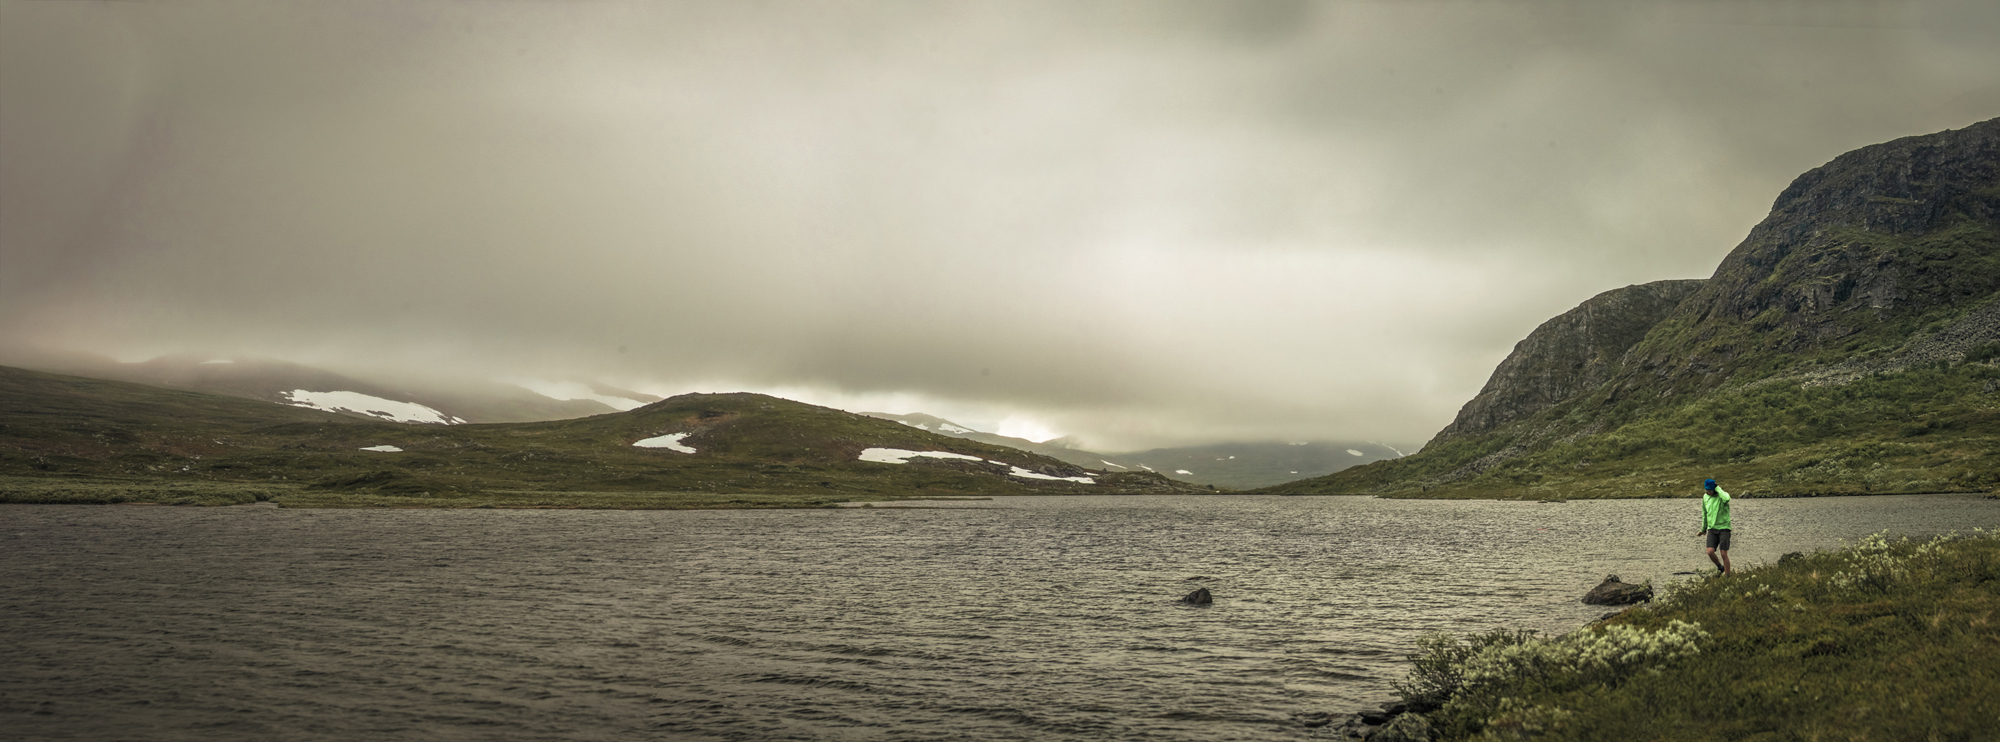 2015 Lierne Pano Storvatnet